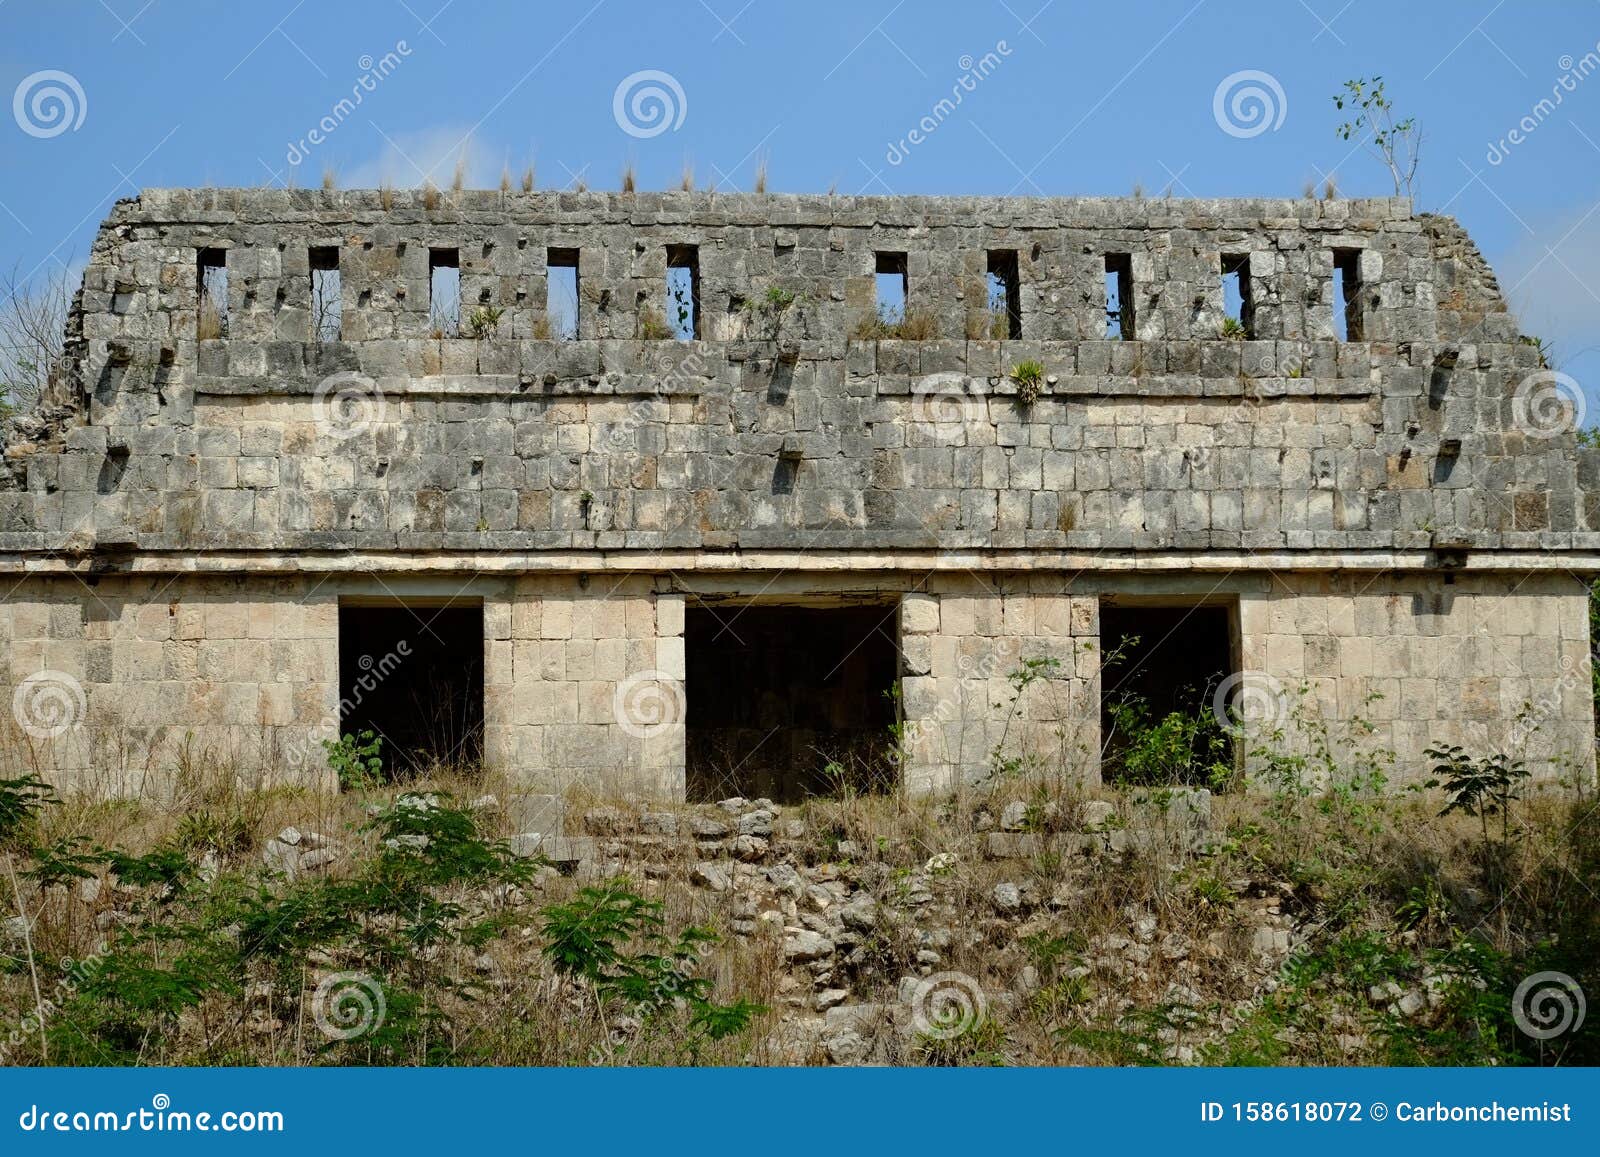 Ancient Mayan Ruins In Mexico Stock Photo Image Of Culture Mexico 158618072